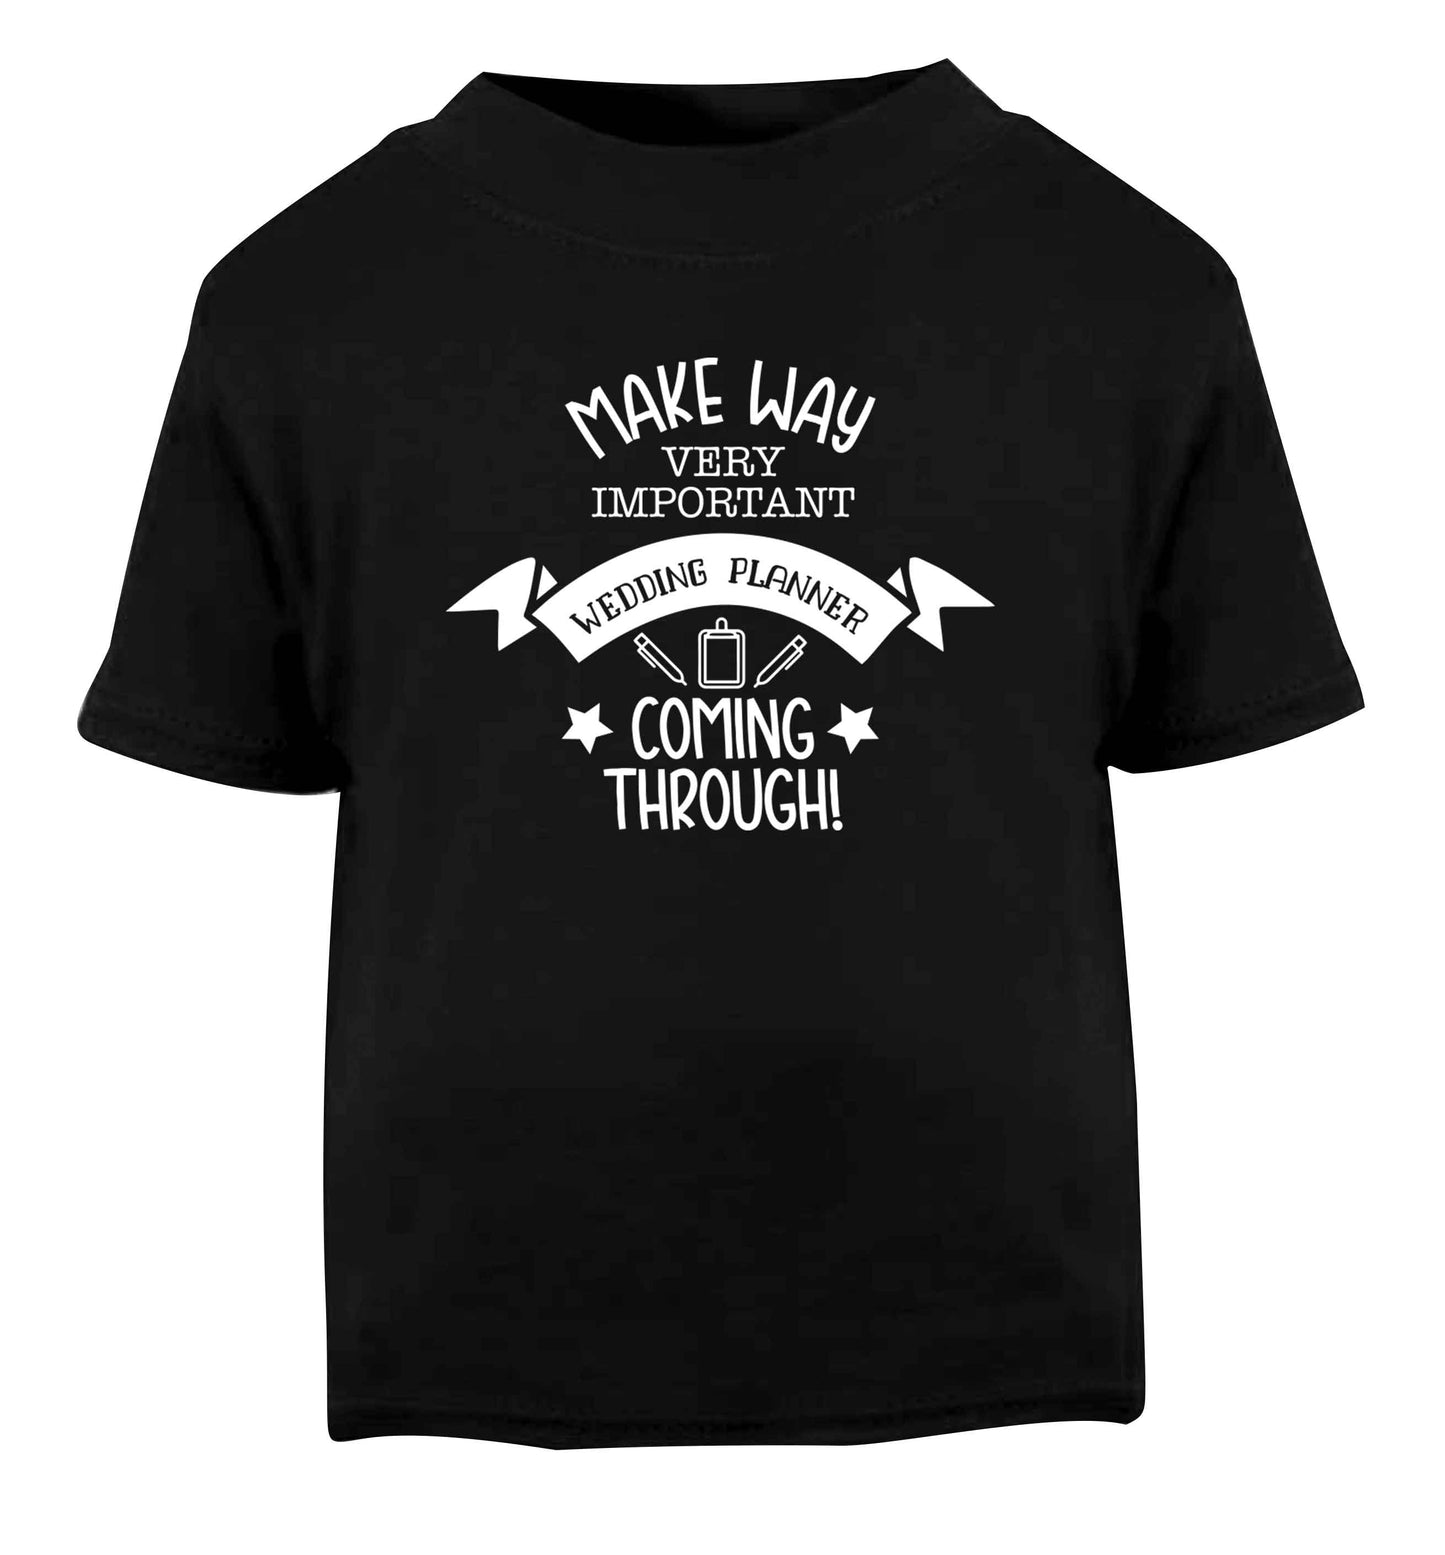 Make way very important wedding planner coming through Black Baby Toddler Tshirt 2 years